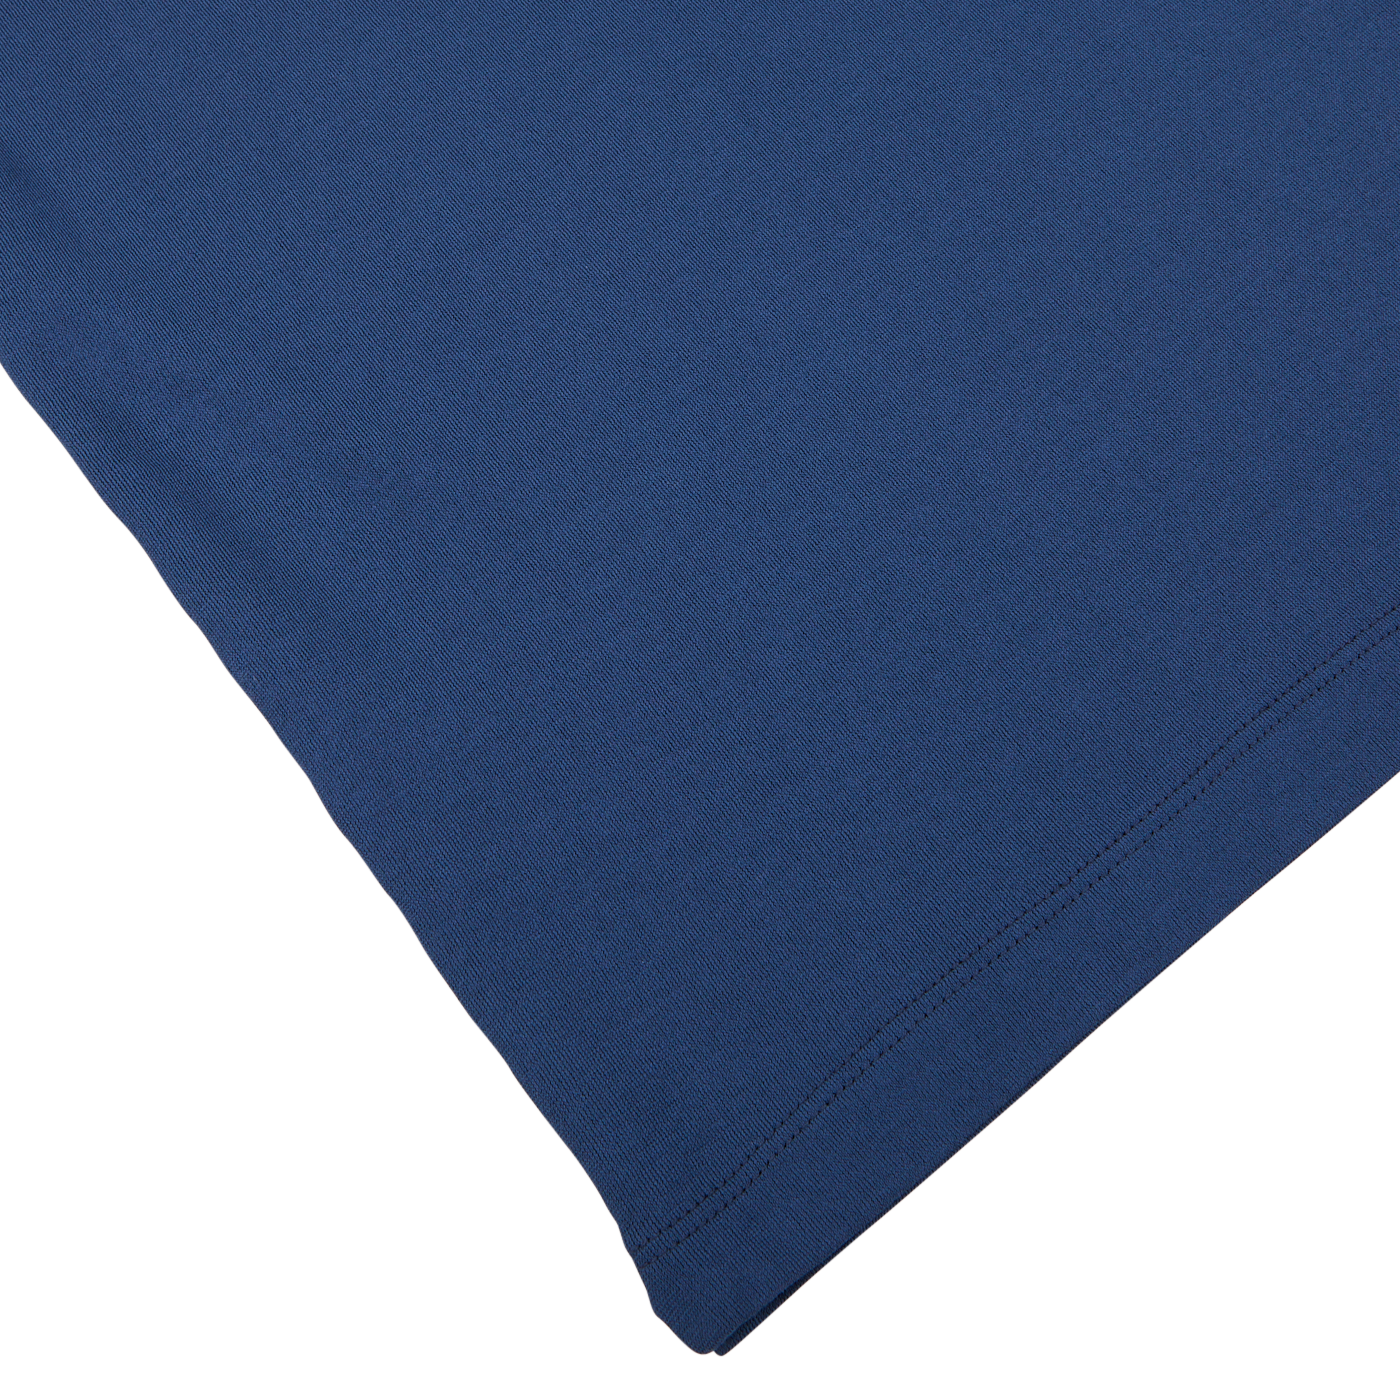 Blue Dark Blue Cotton Jersey Capri Collar Polo Shirt with visible stitching on a white background by Altea.